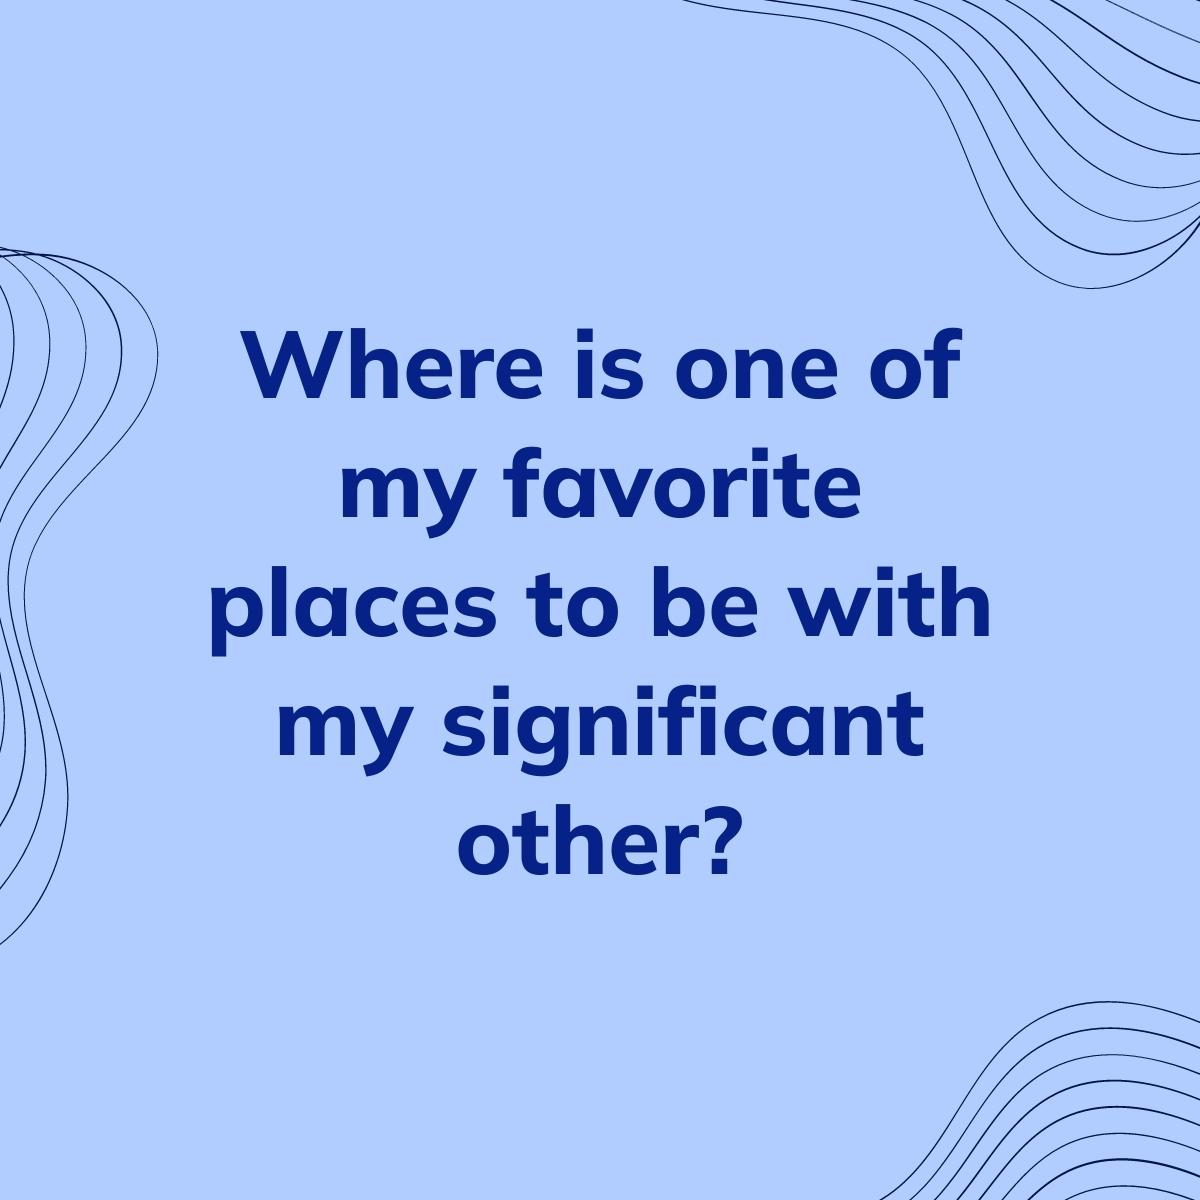 Journal Prompt: Where is one of my favorite places to be with my significant other?